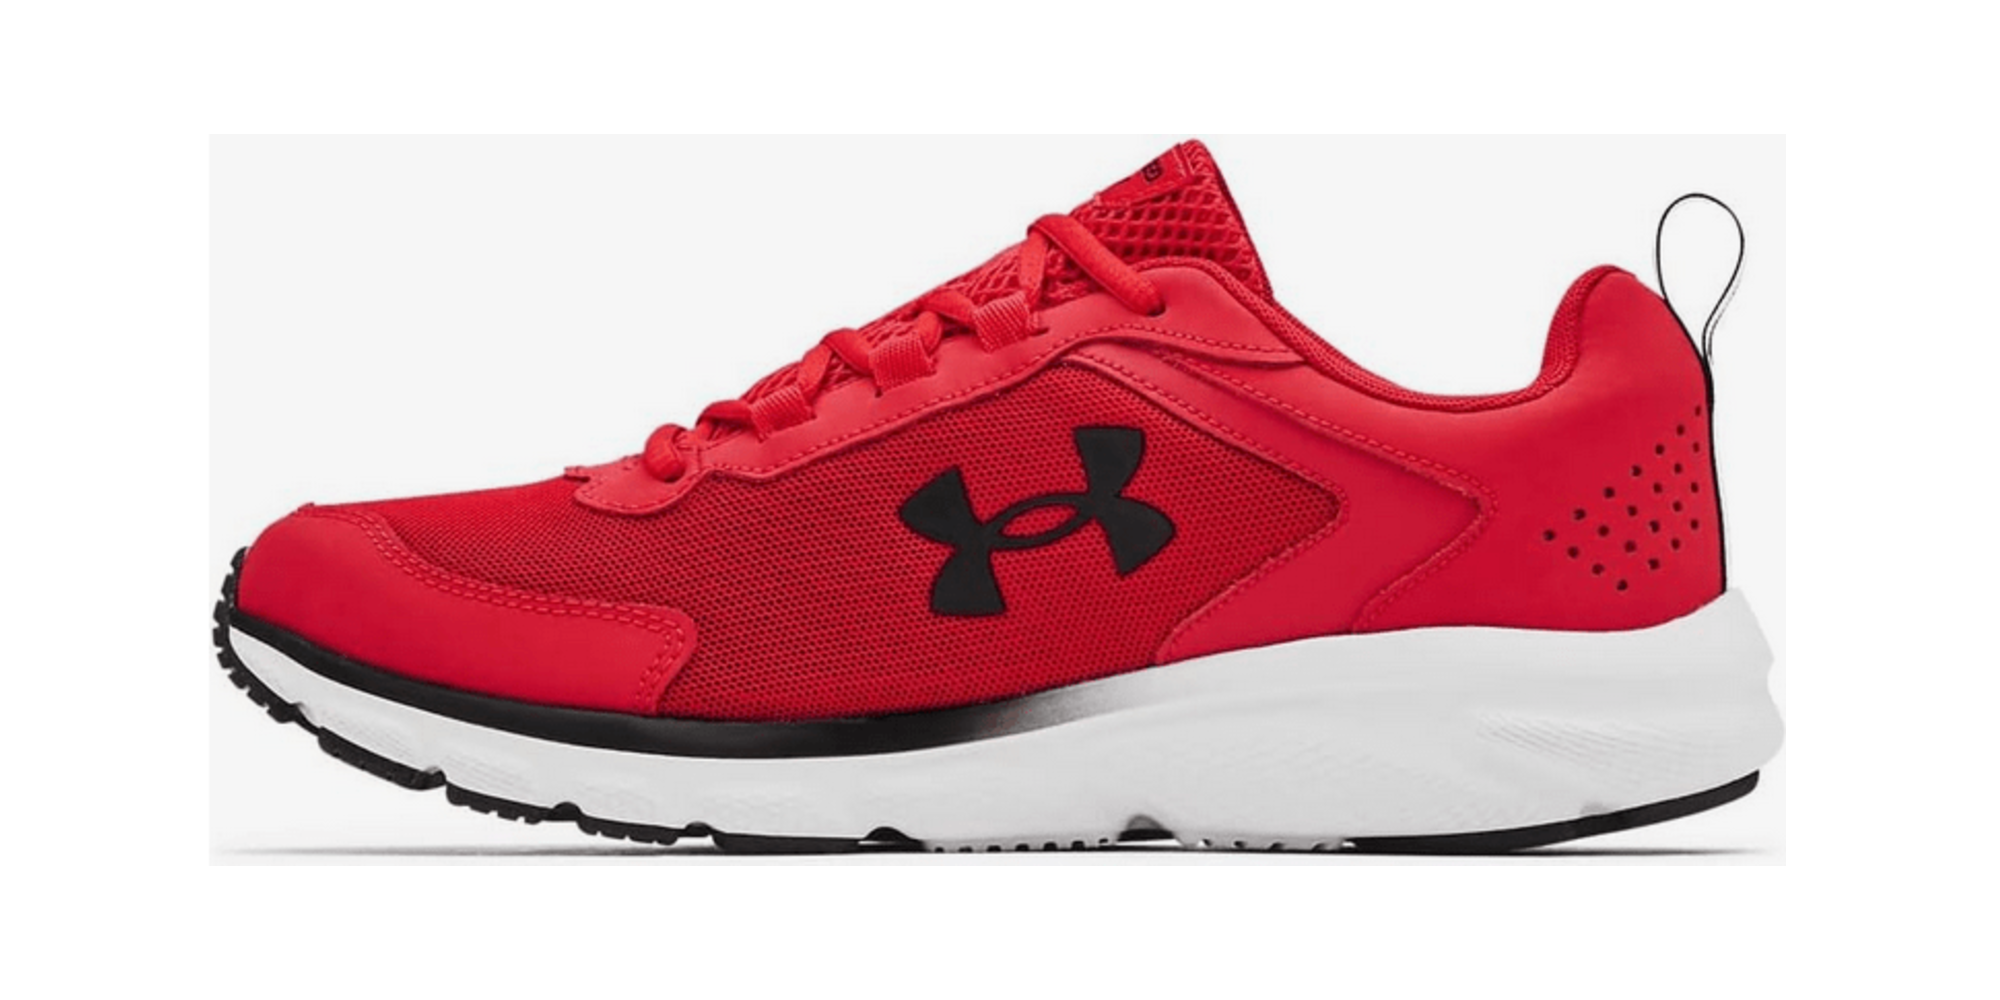 "Stepping Up: Under Armour Charged Assert 9 Women's Hype Unveiled"